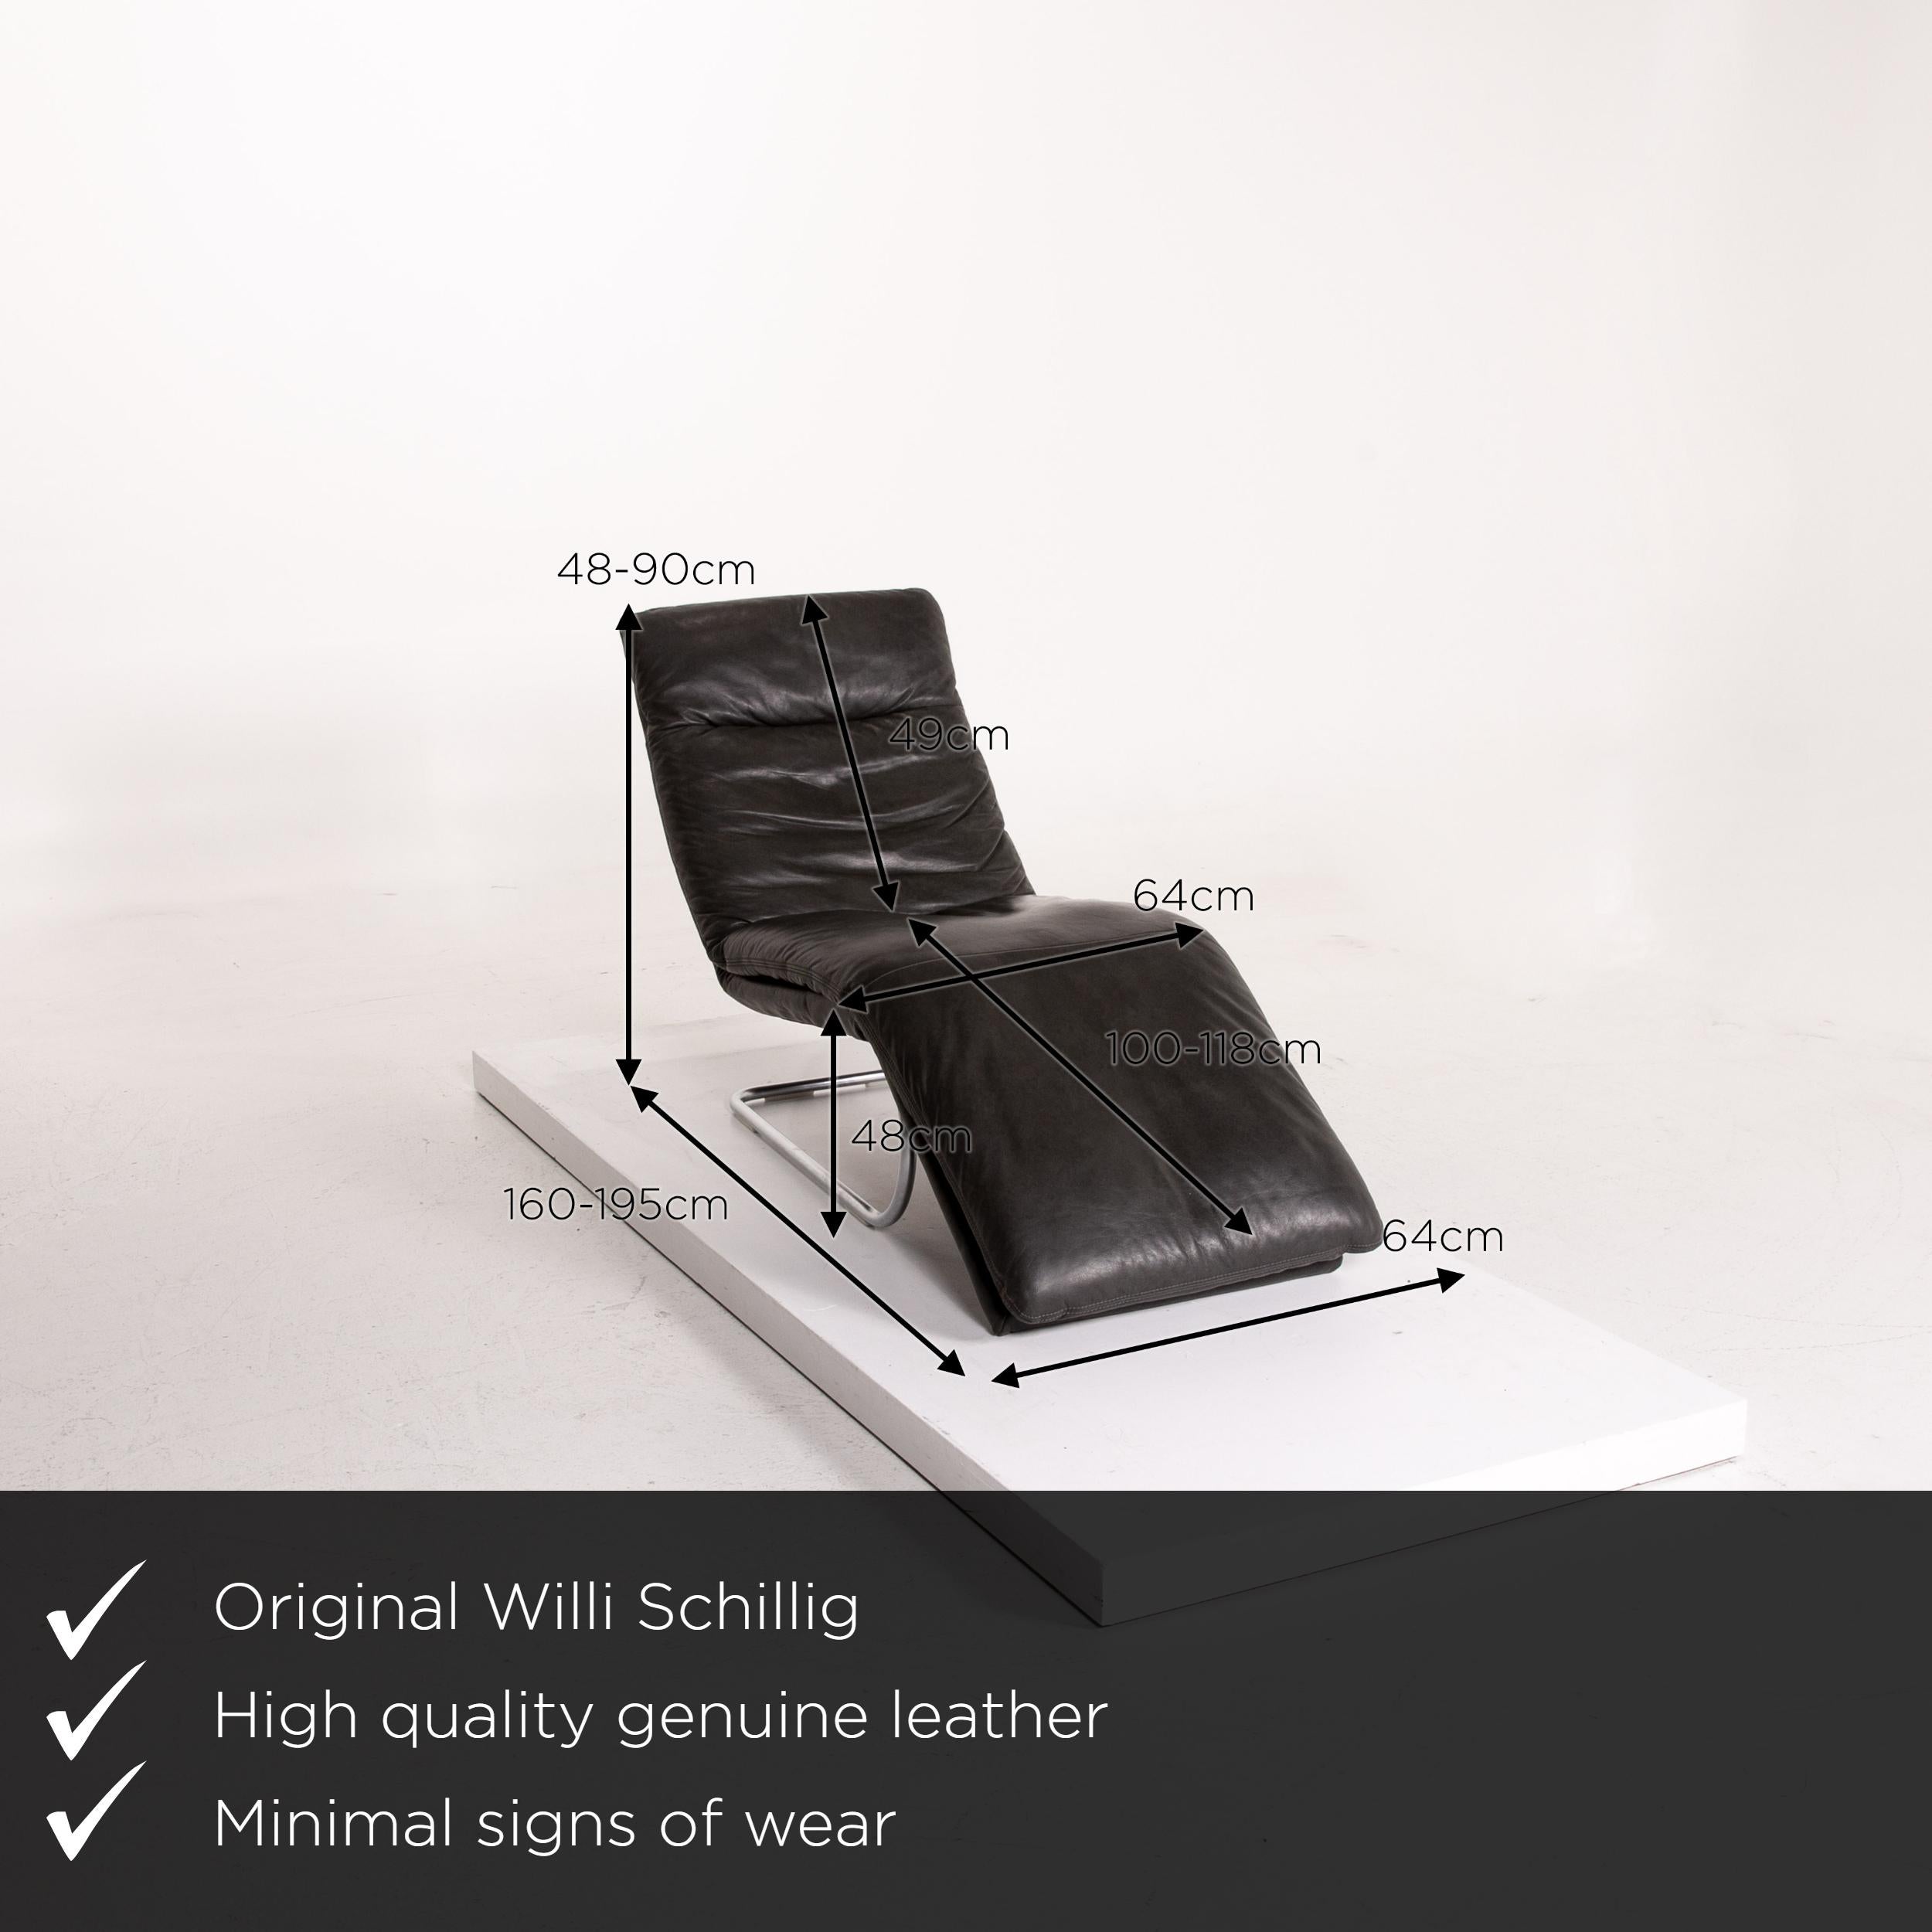 We present to you a Willi Schillig Jill leather lounger gray relax lounger.
 
 

 Product measurements in centimeters:
 

Depth 160
Width 64
Height 90
Seat height 48
Seat depth 100
Seat width 64
Back height 49.
   